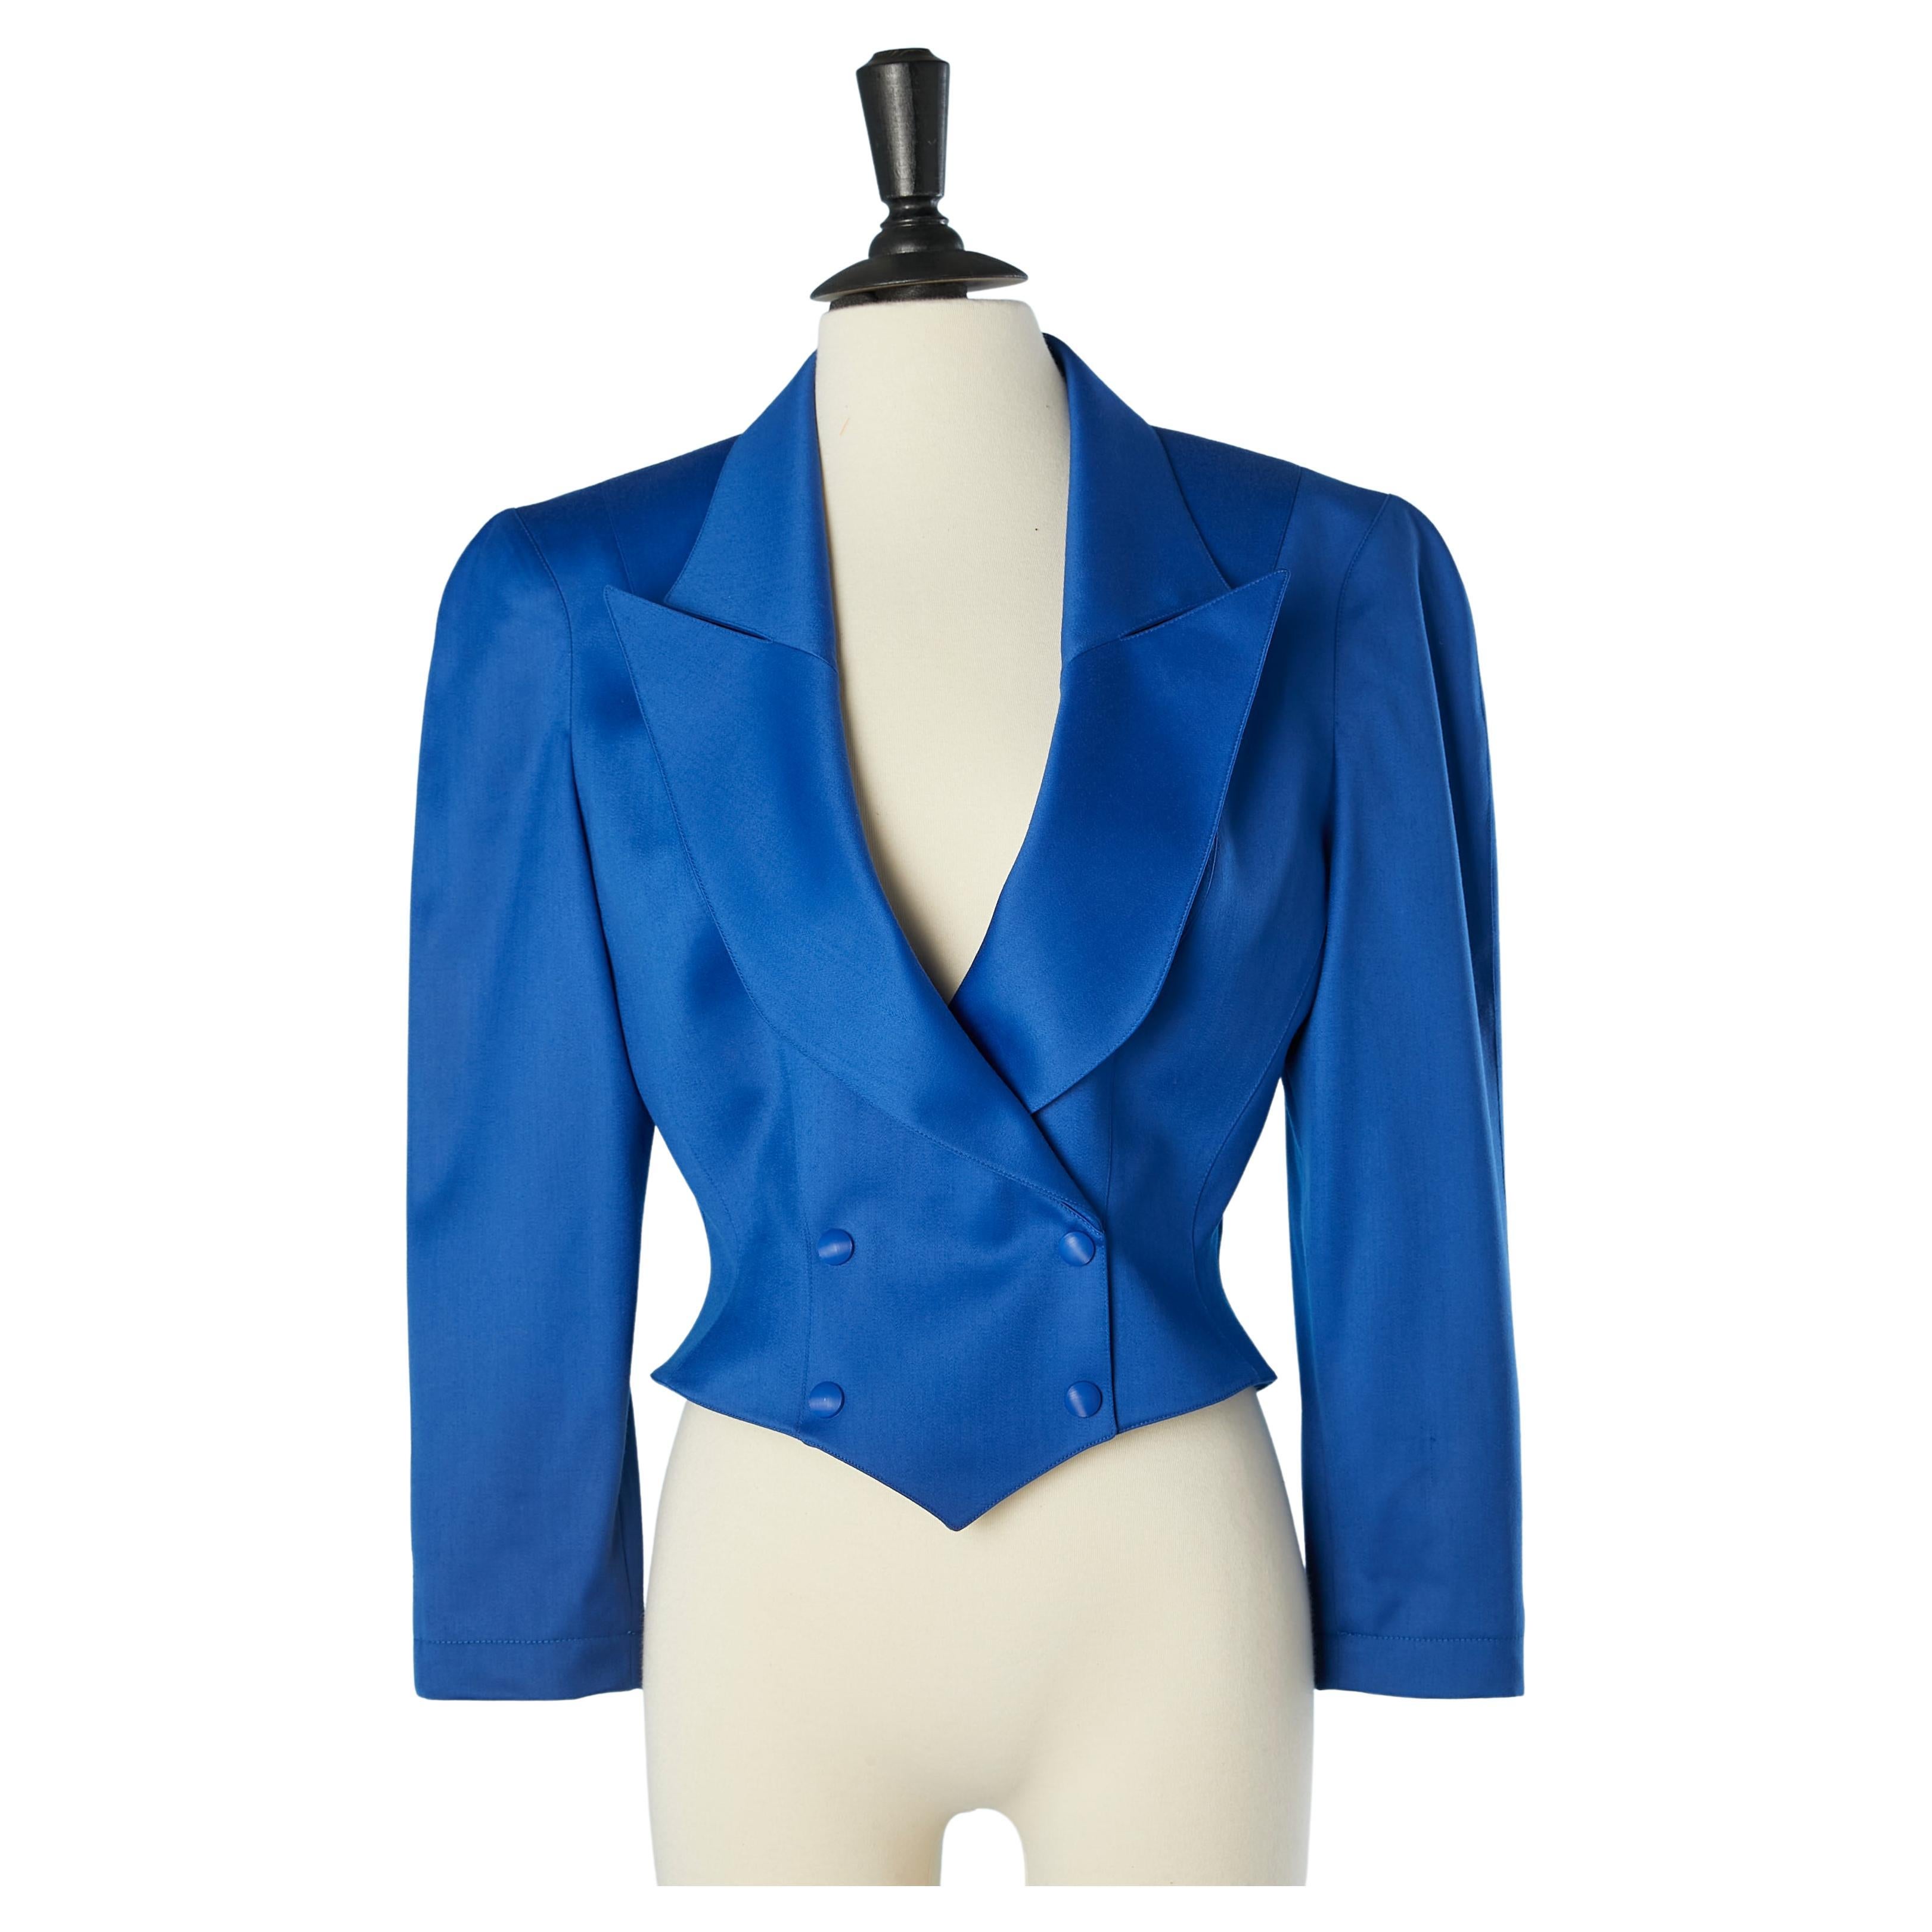 Blue double-breasted worsted wool jacket Thierry Mugler Paris 